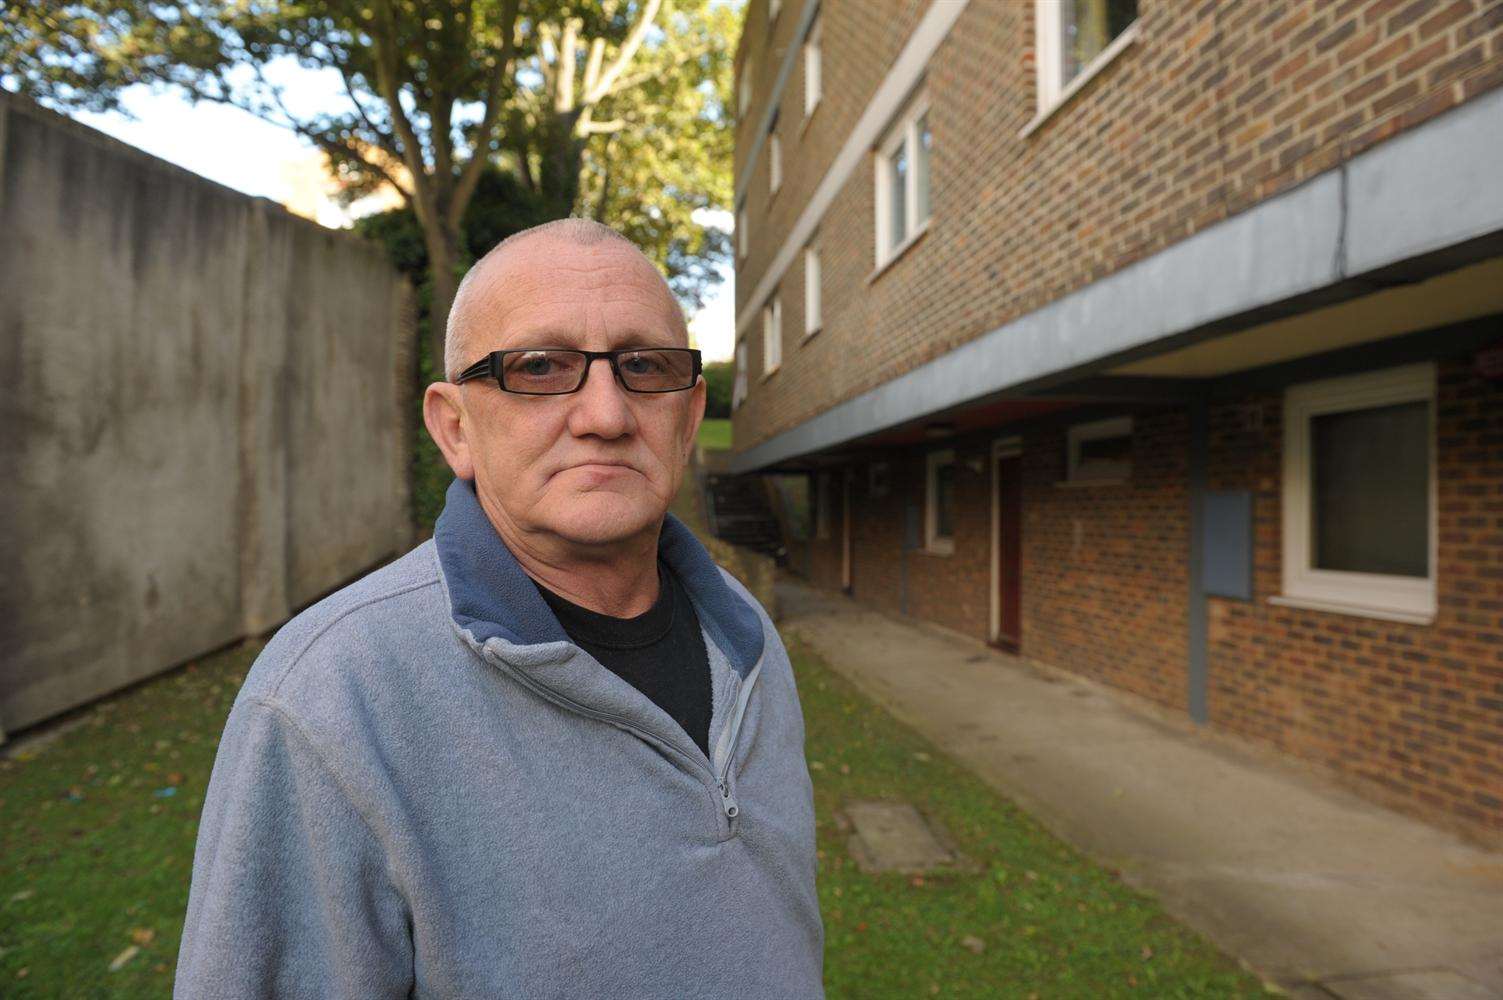 He believes moving away from the barracks would help his condition. Picture: Steve Crispe